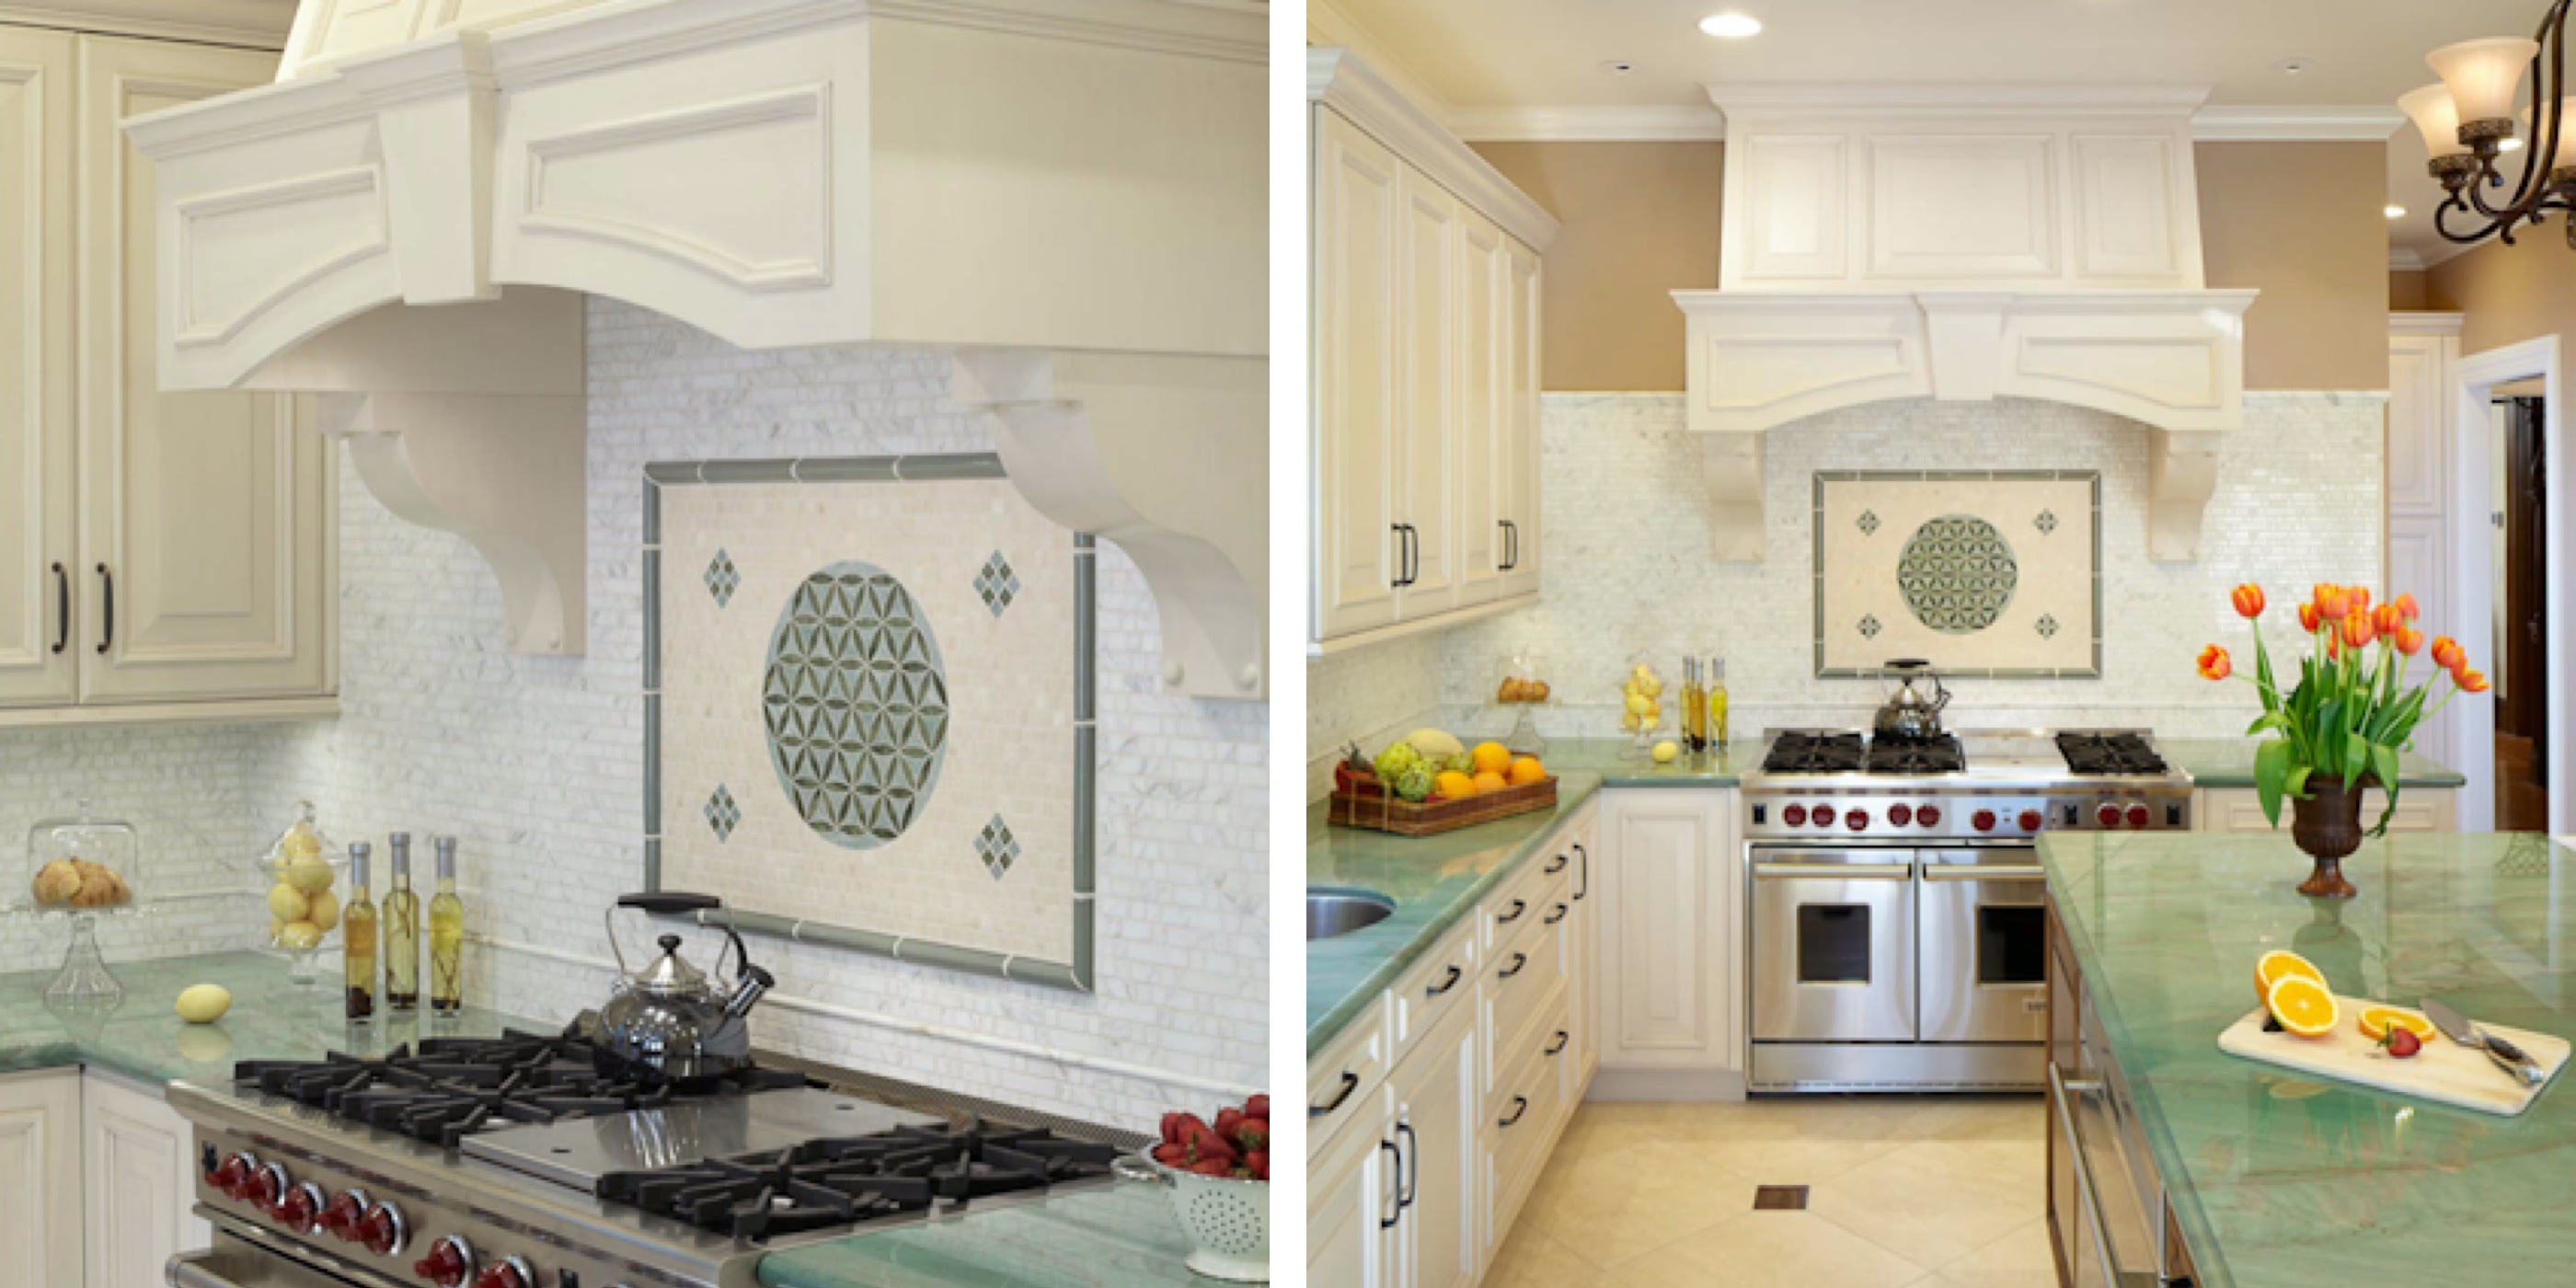 The Top High-End Backsplash Designs in the East Bay Area - Victorian Kitchen with Tree of Life Tile Design